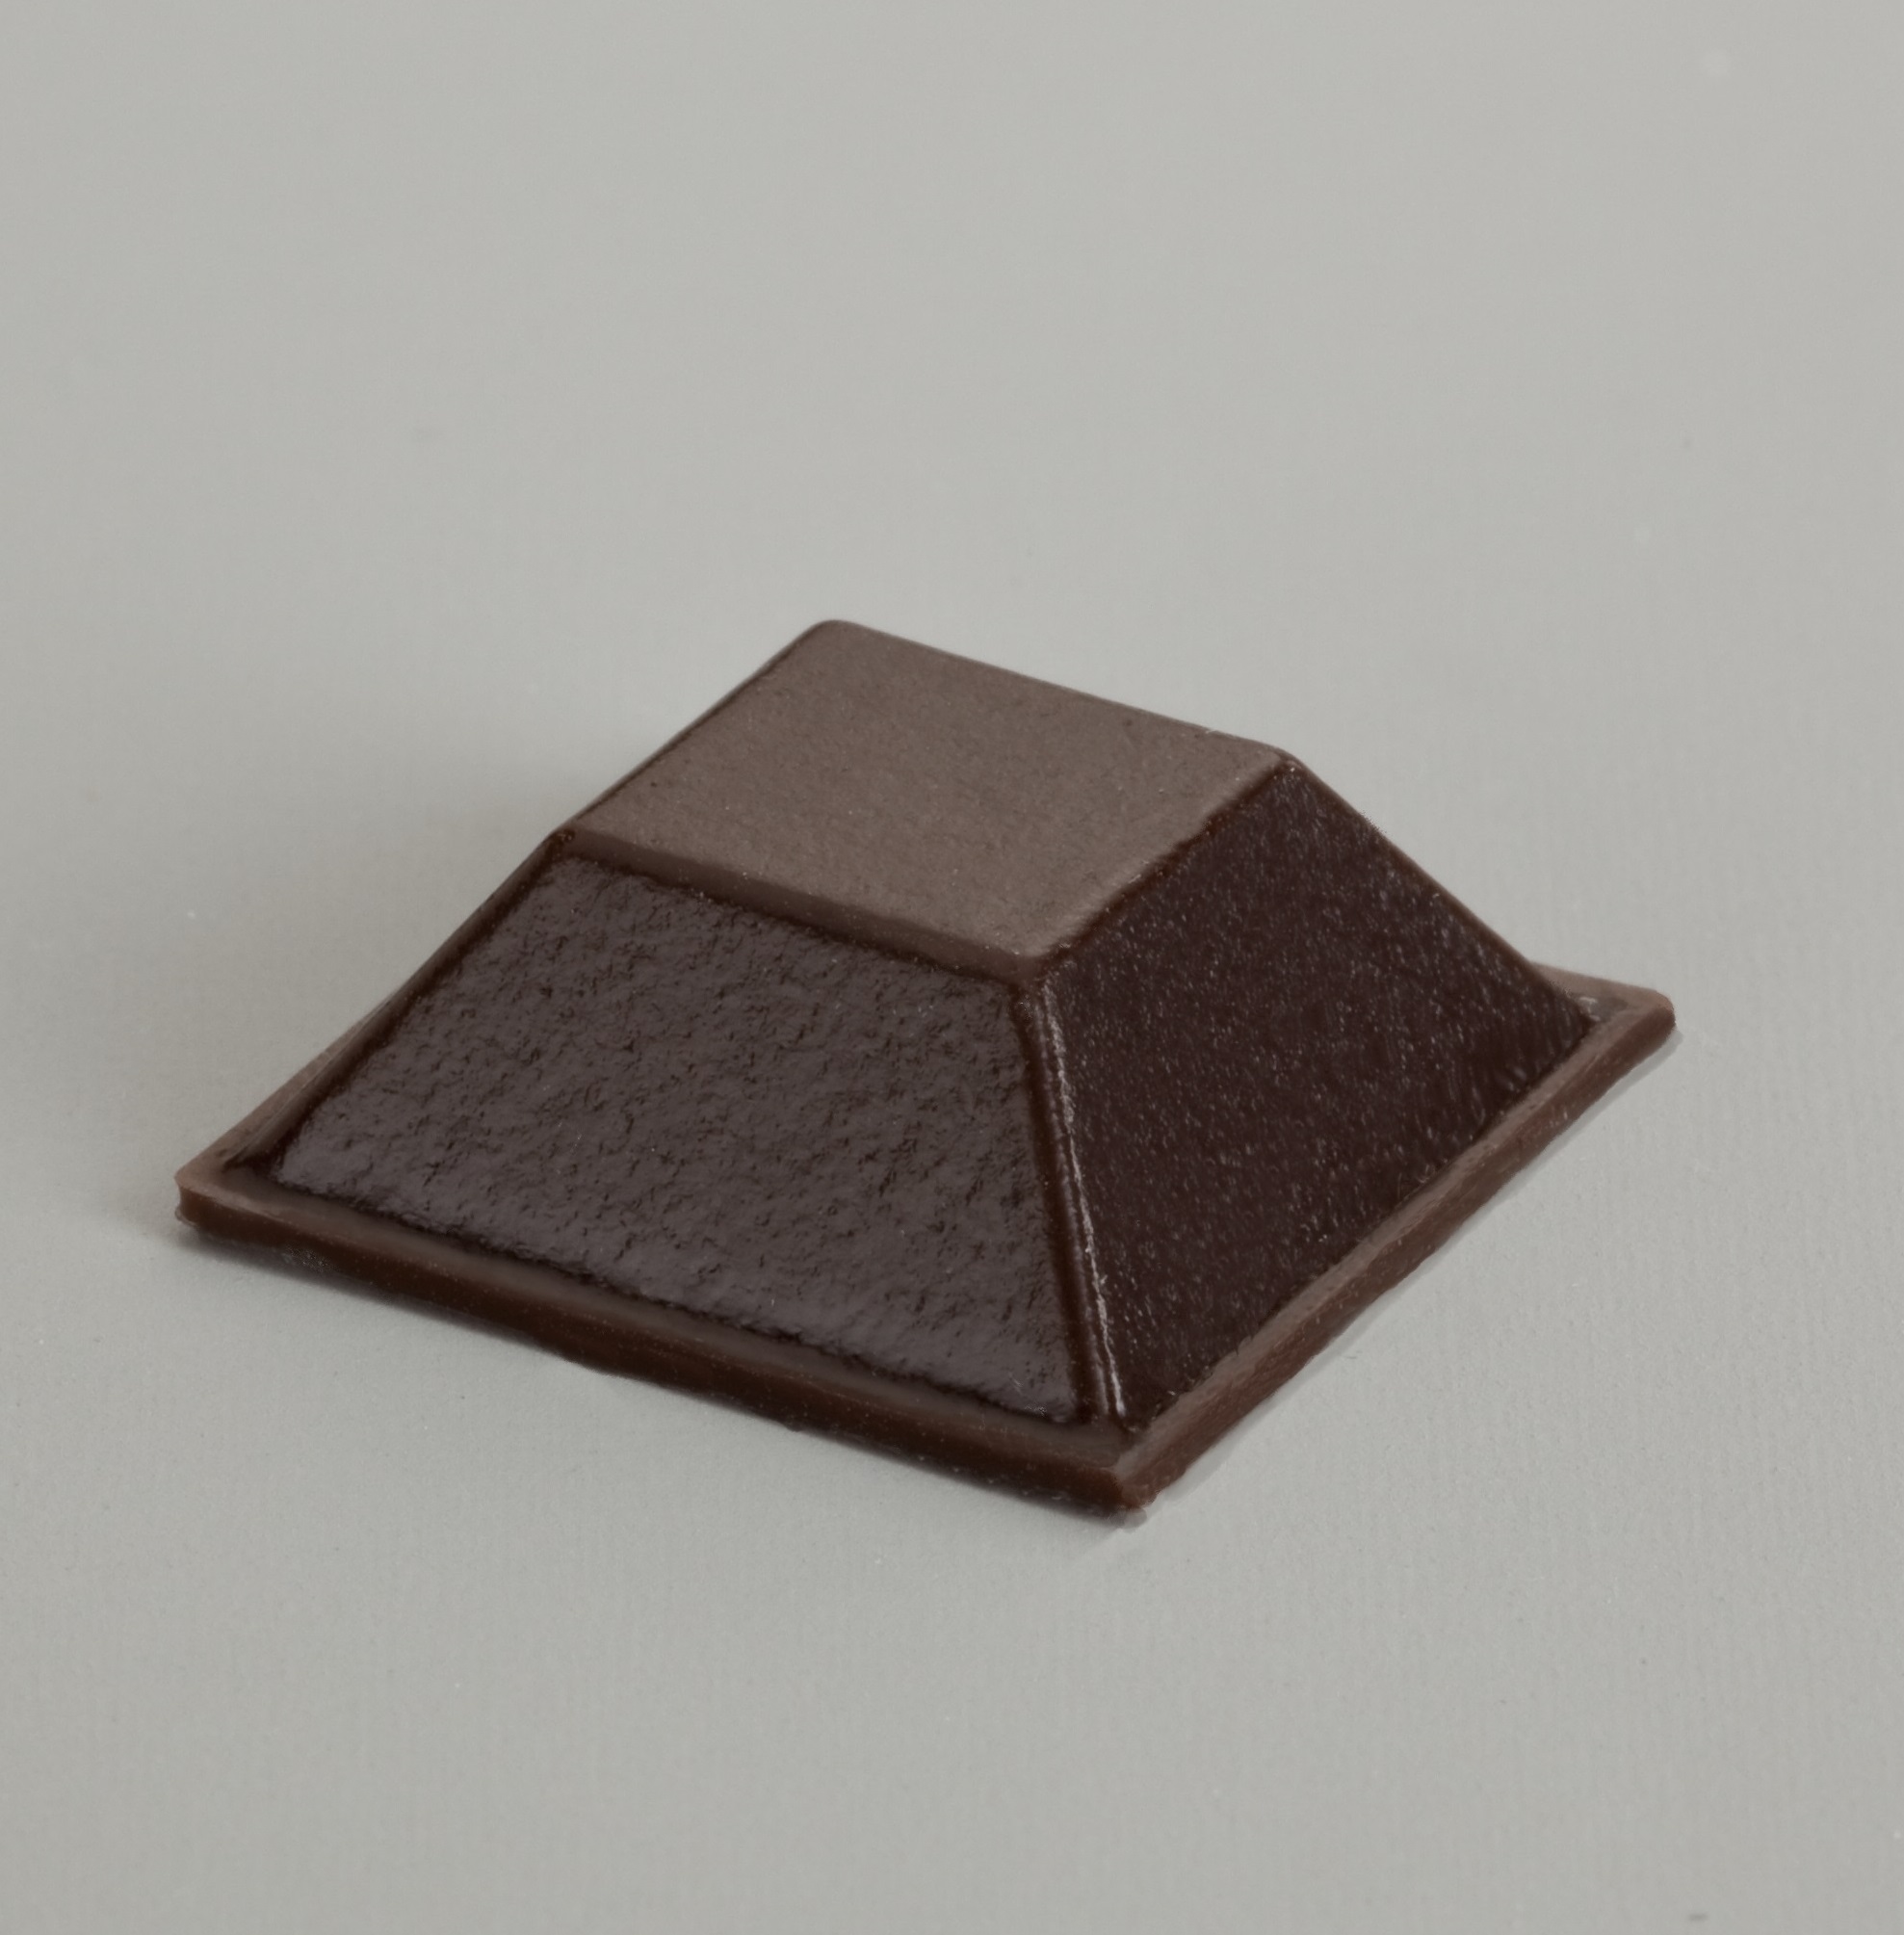 BS-19 BROWN product image